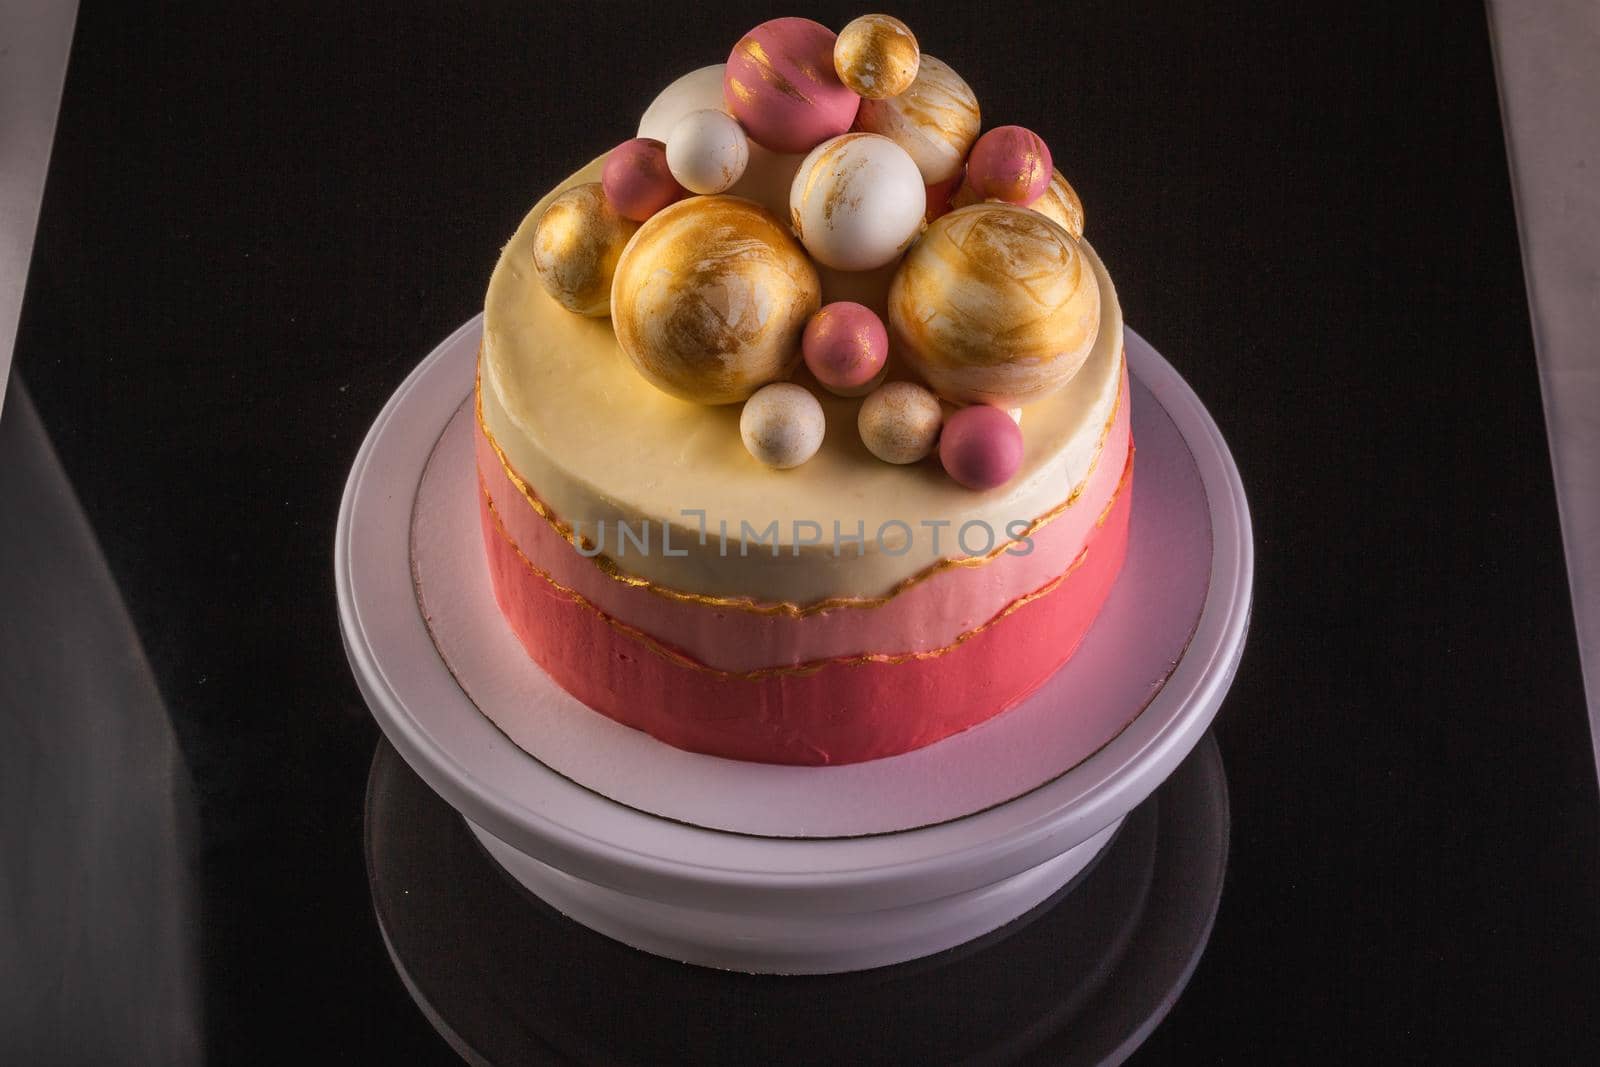 Chocolate layered cake with ganache cream and pink confiture. Decorated with purple and gold chocolate spheres.